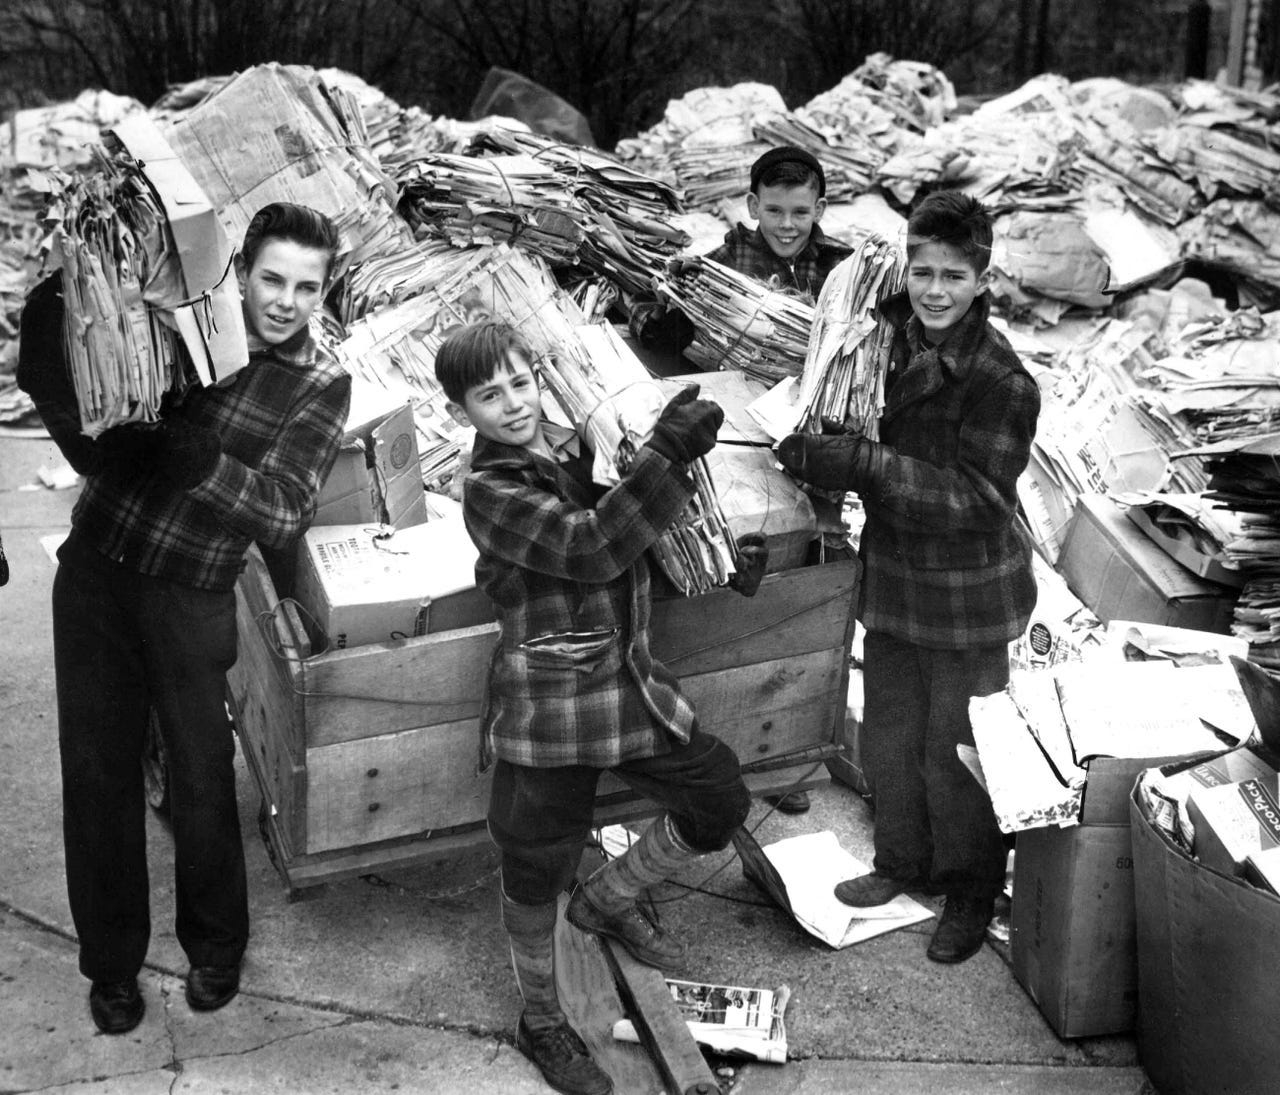 During January 1944 a group of young men; Detroit's salvage effort continued throughout the war. Here, James Braill, John Dresbach, Tom Dresbacha and John Brazill collect paper to recycle in December 1944.